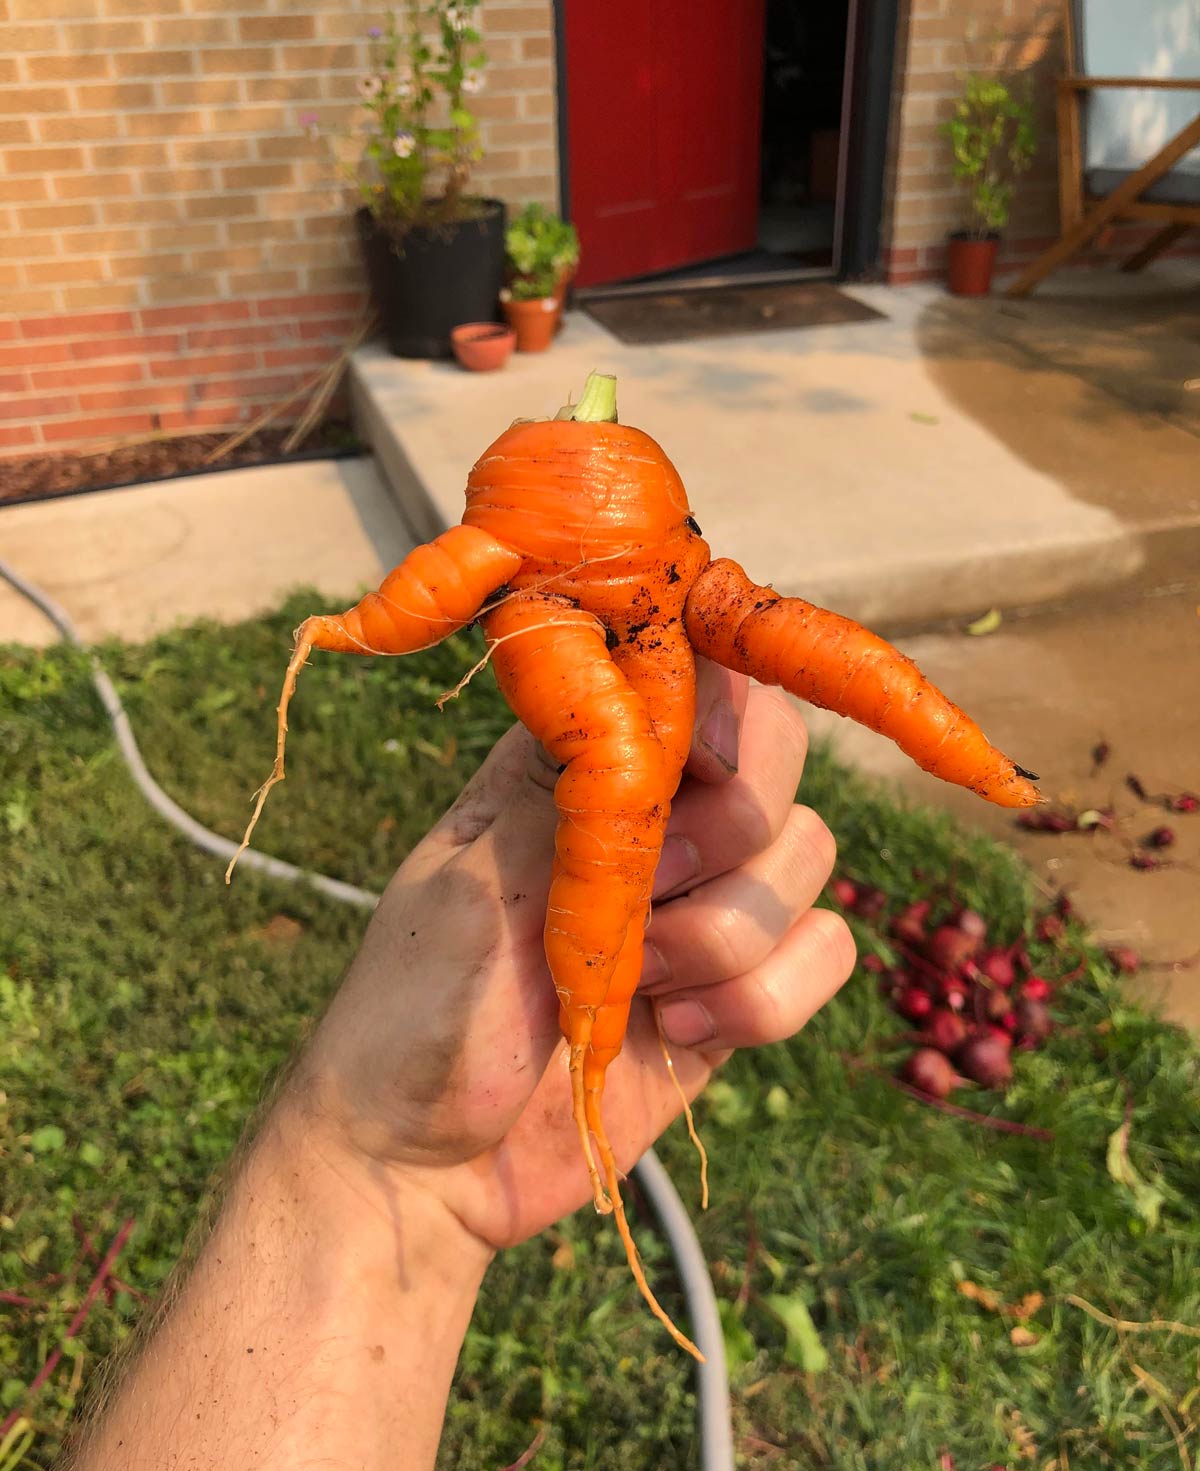 This carrot I pulled out of my garden